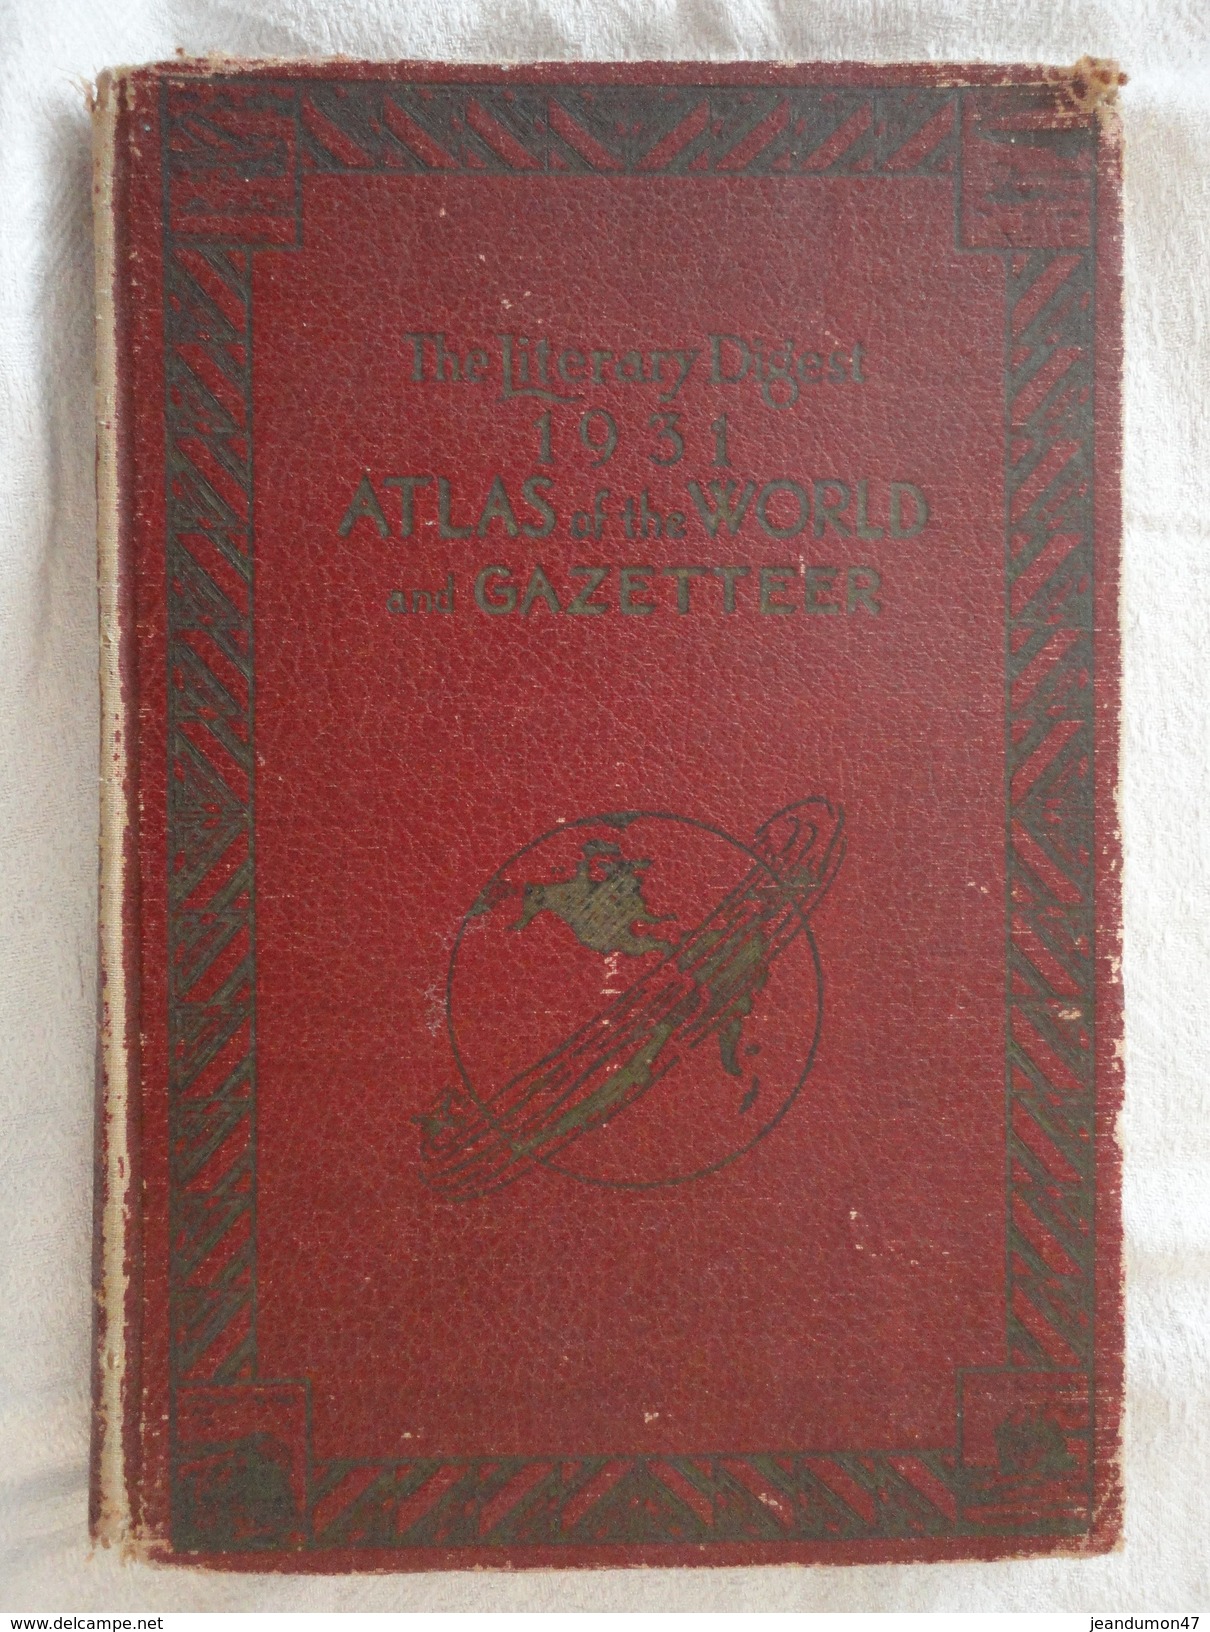 THE LITERARY DIGEST 1931. ATLAS OF THE WORLD AND GAZETTEER. 256 PAGES. RAND MçNALLY & COMPANY - CHICAGO - 1900-1949